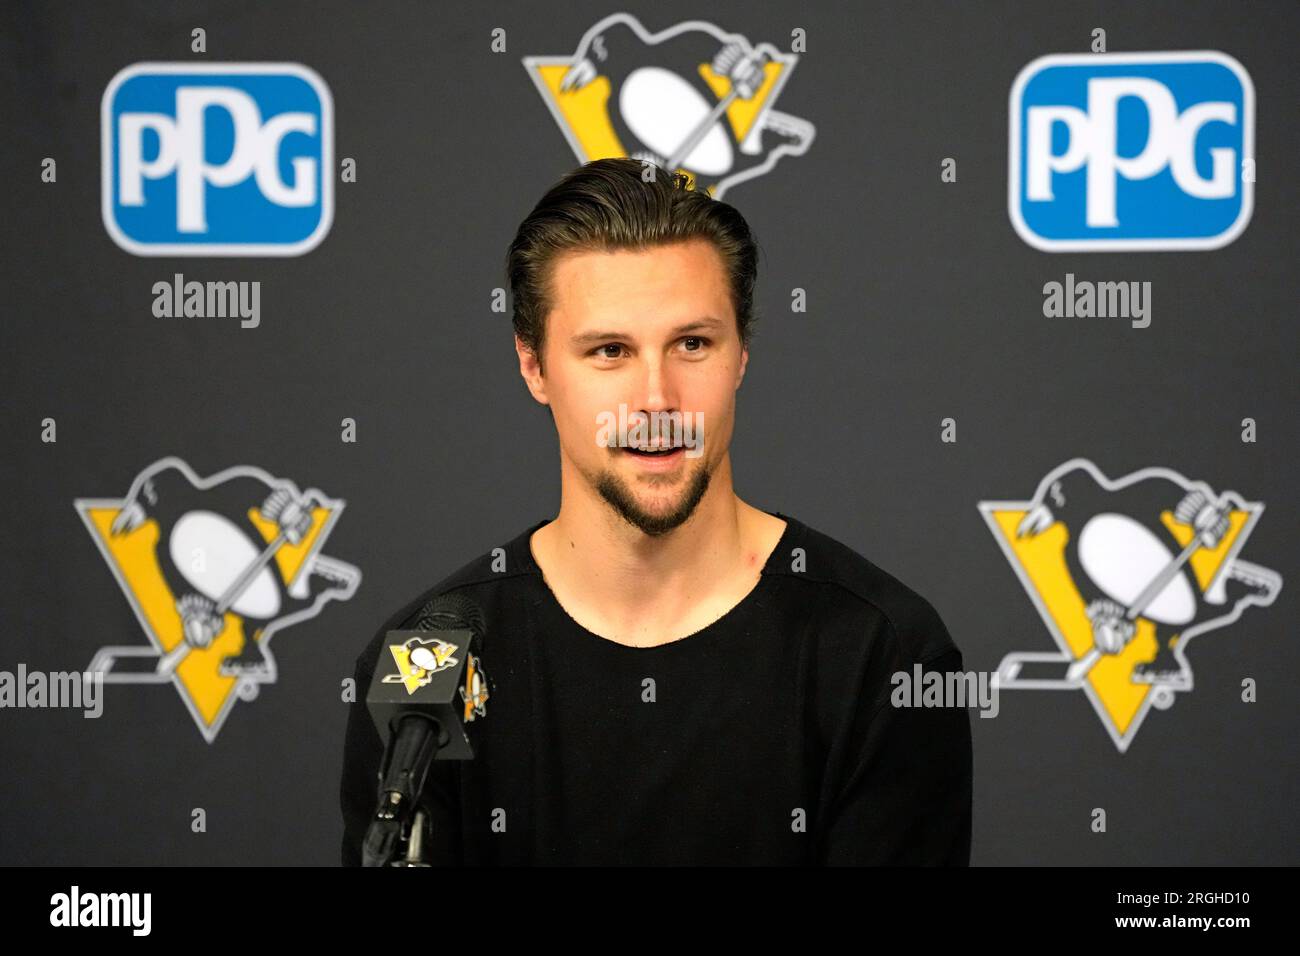 IN PHOTOS: Erik Karlsson sports Penguins threads as he joins his